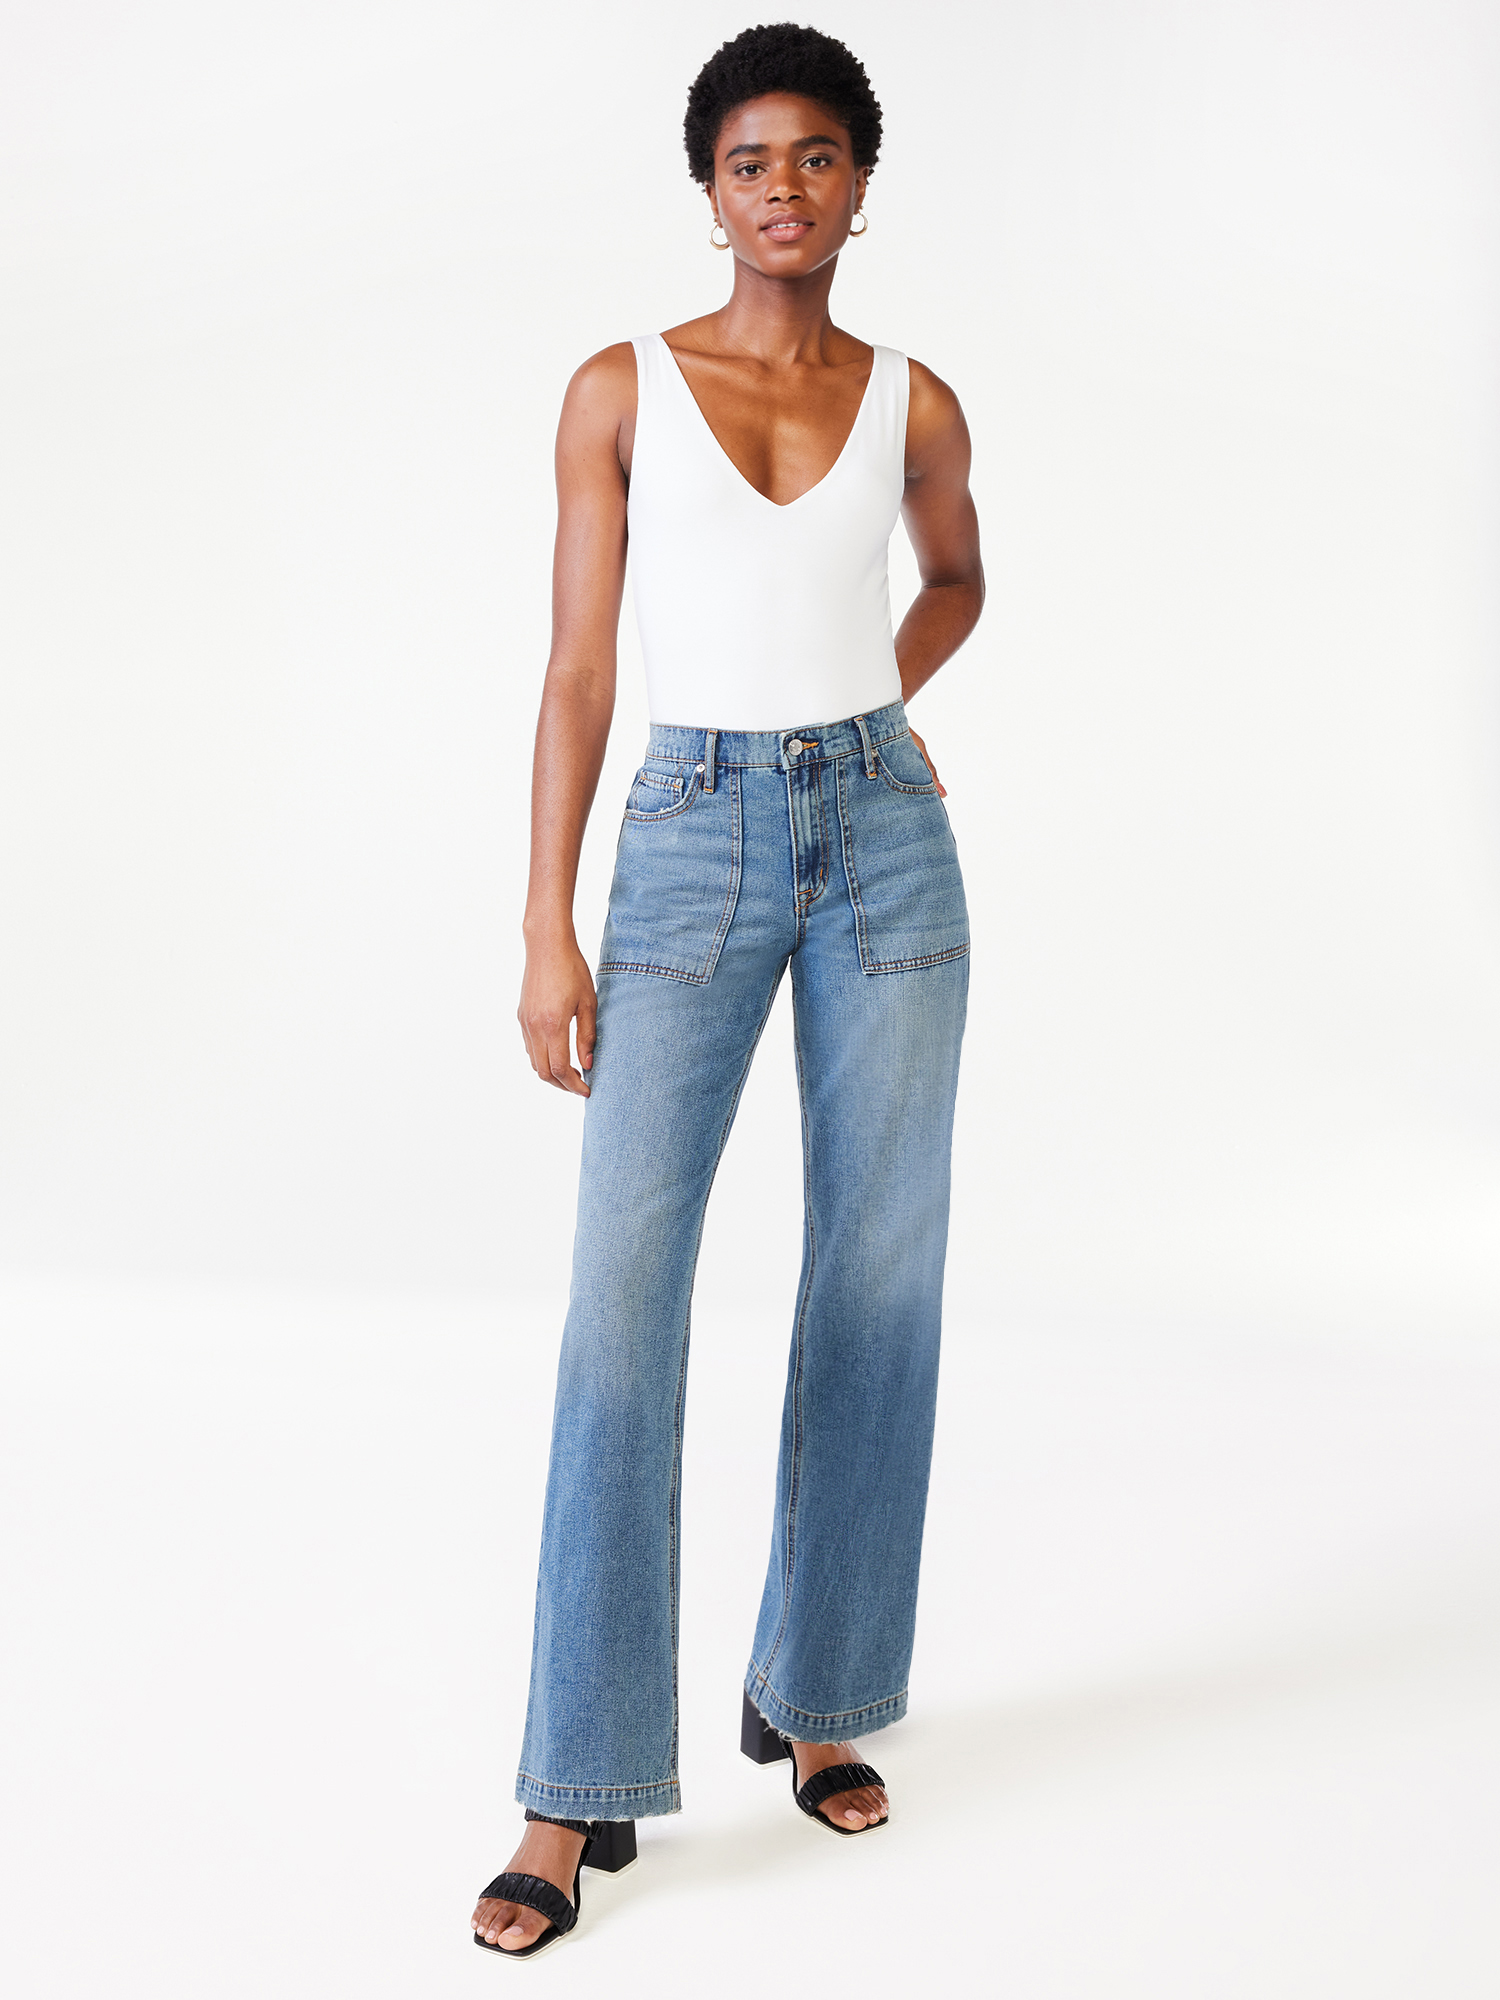 Scoop Women's Low Rise Wide Leg Ripped Jeans - image 2 of 5